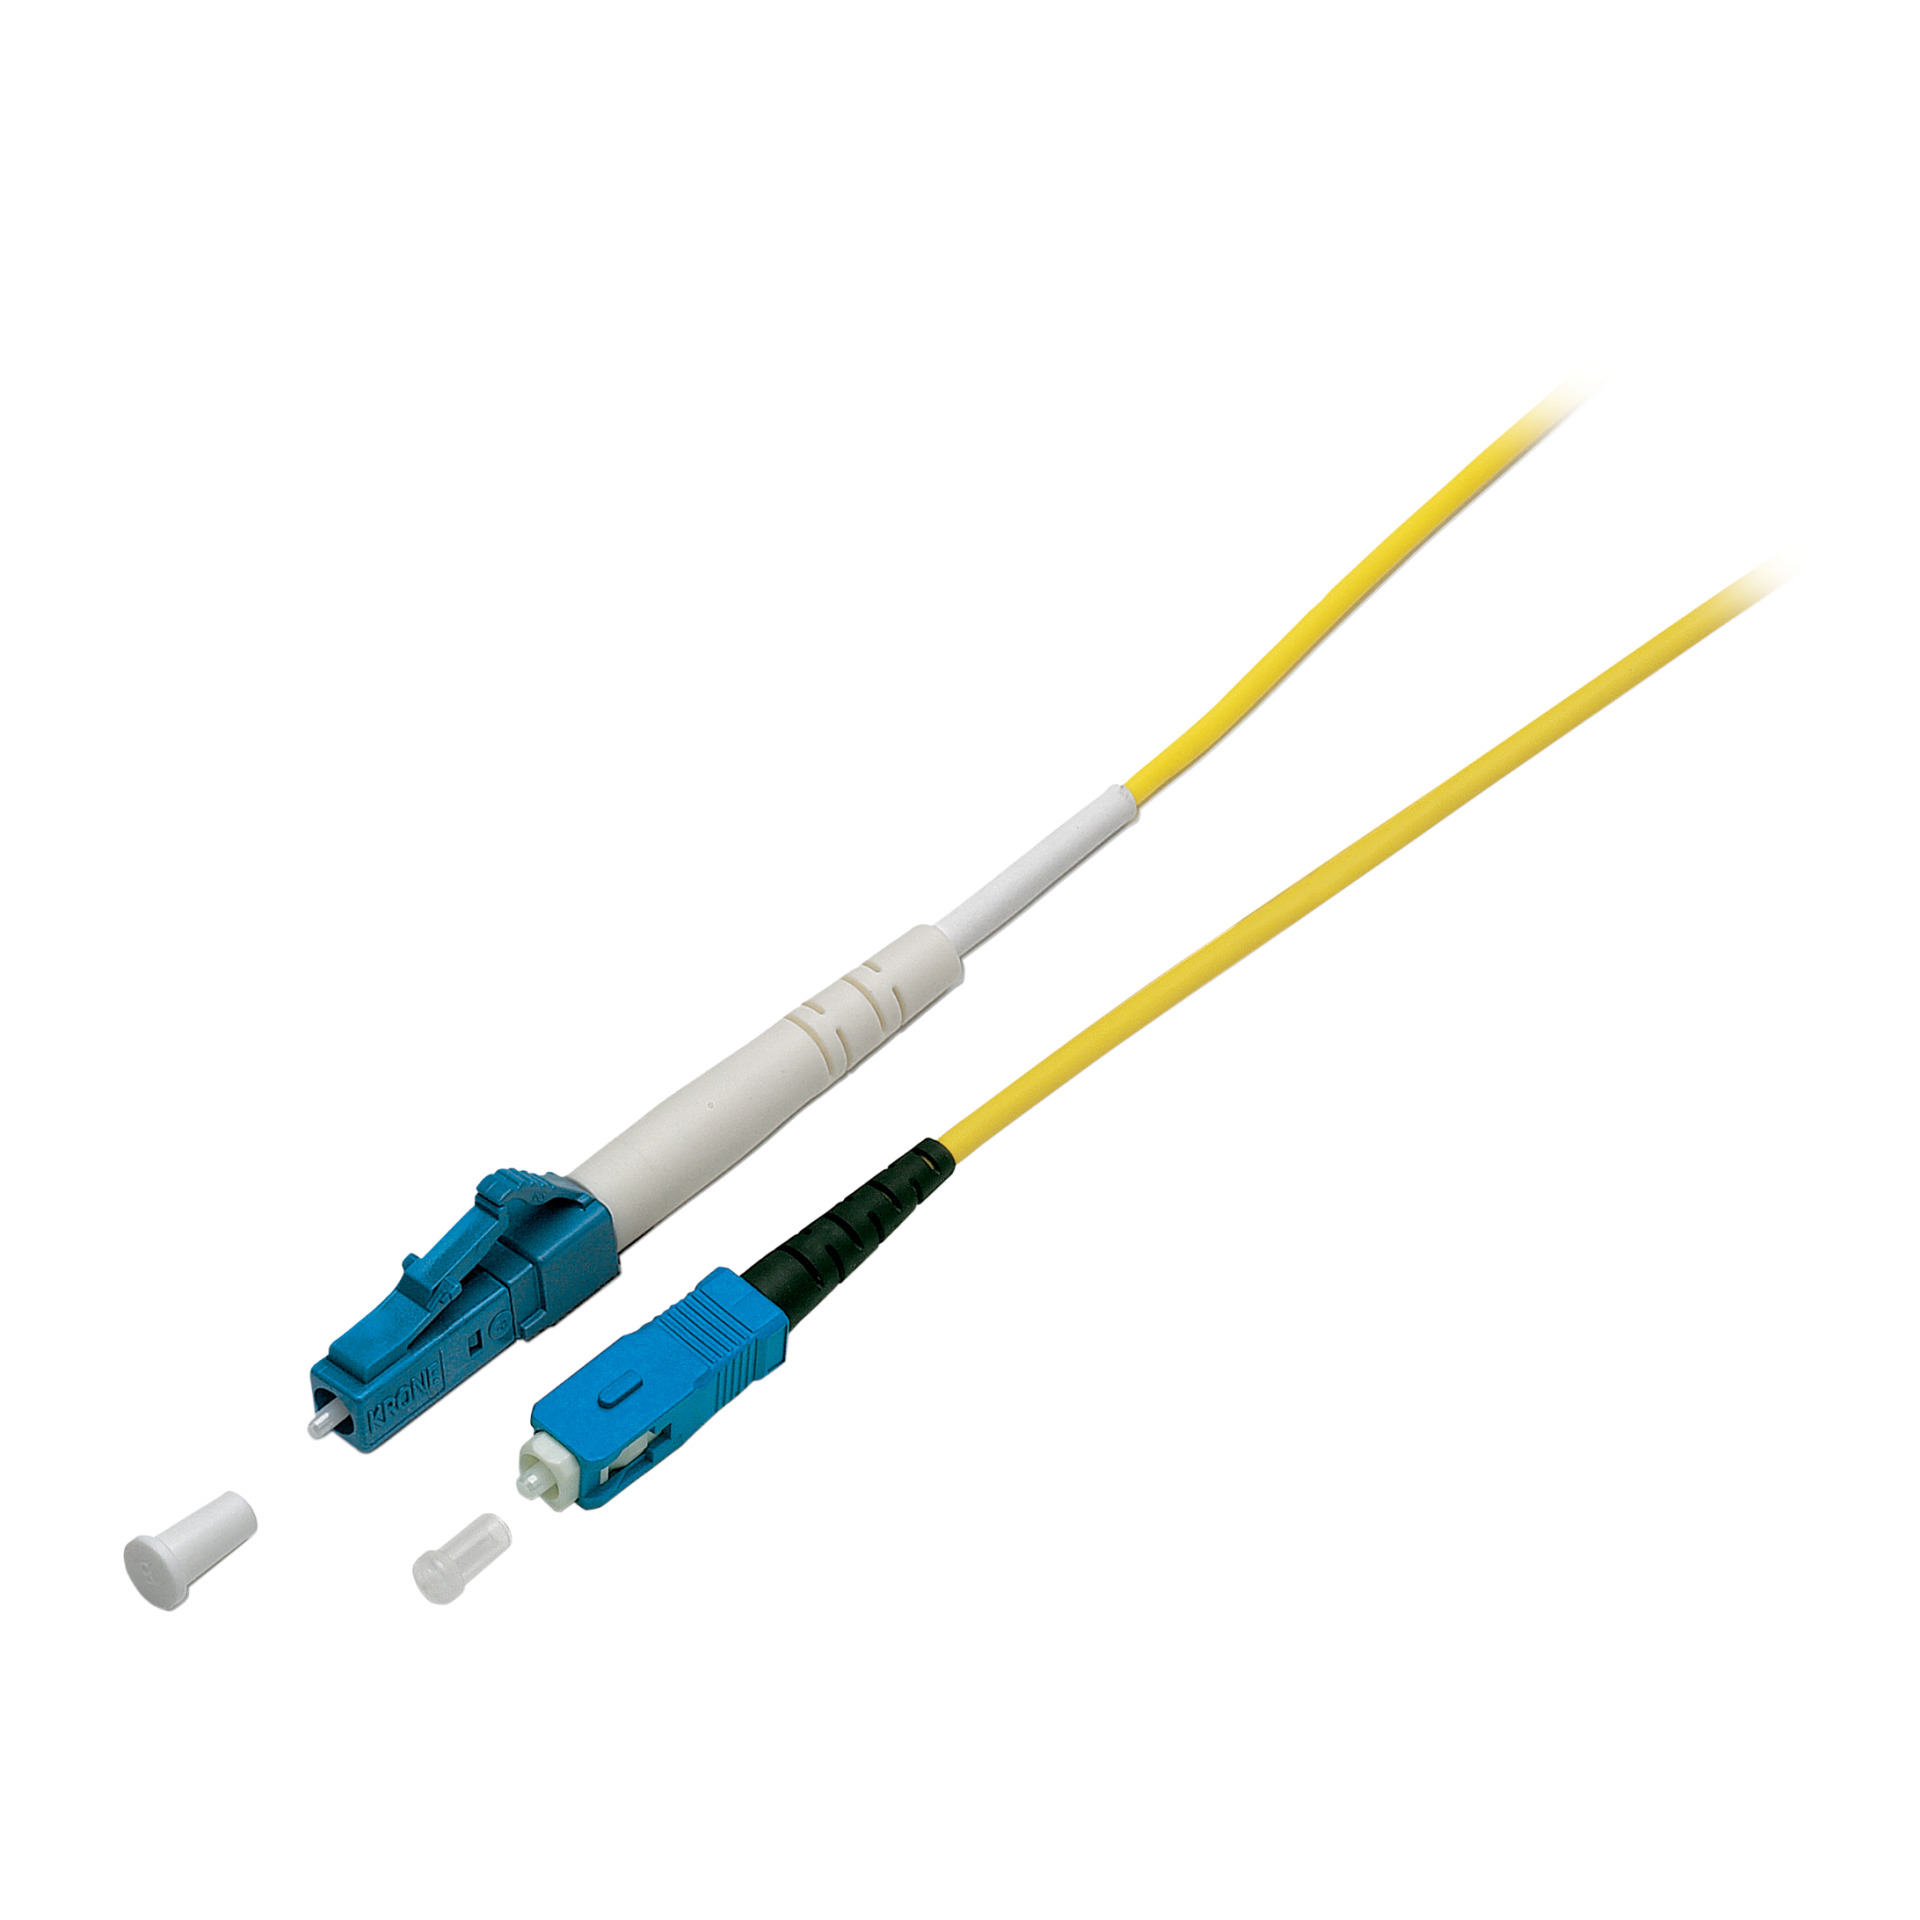 Simplex FO Patch Cable LC-SC G657.A2 10m 2,0mm yellow 9/125µm